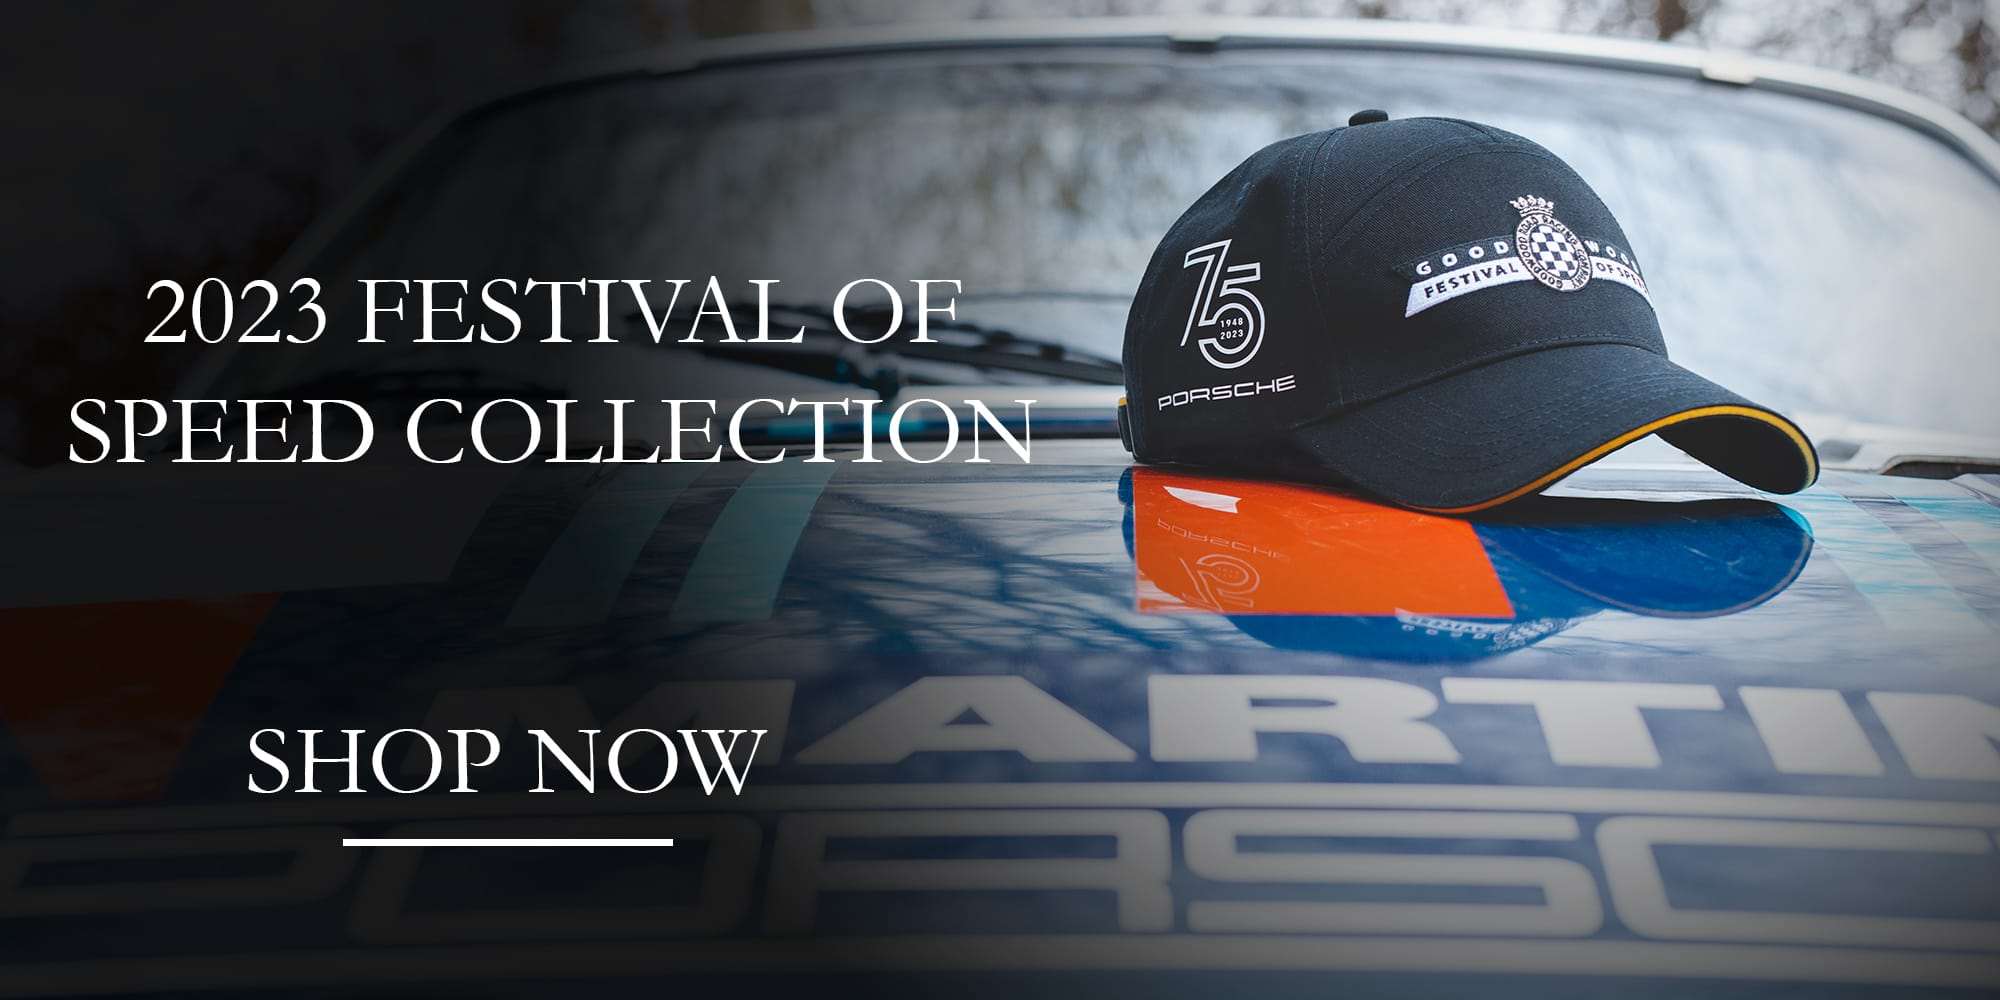 Festival of Speed Collection 2023